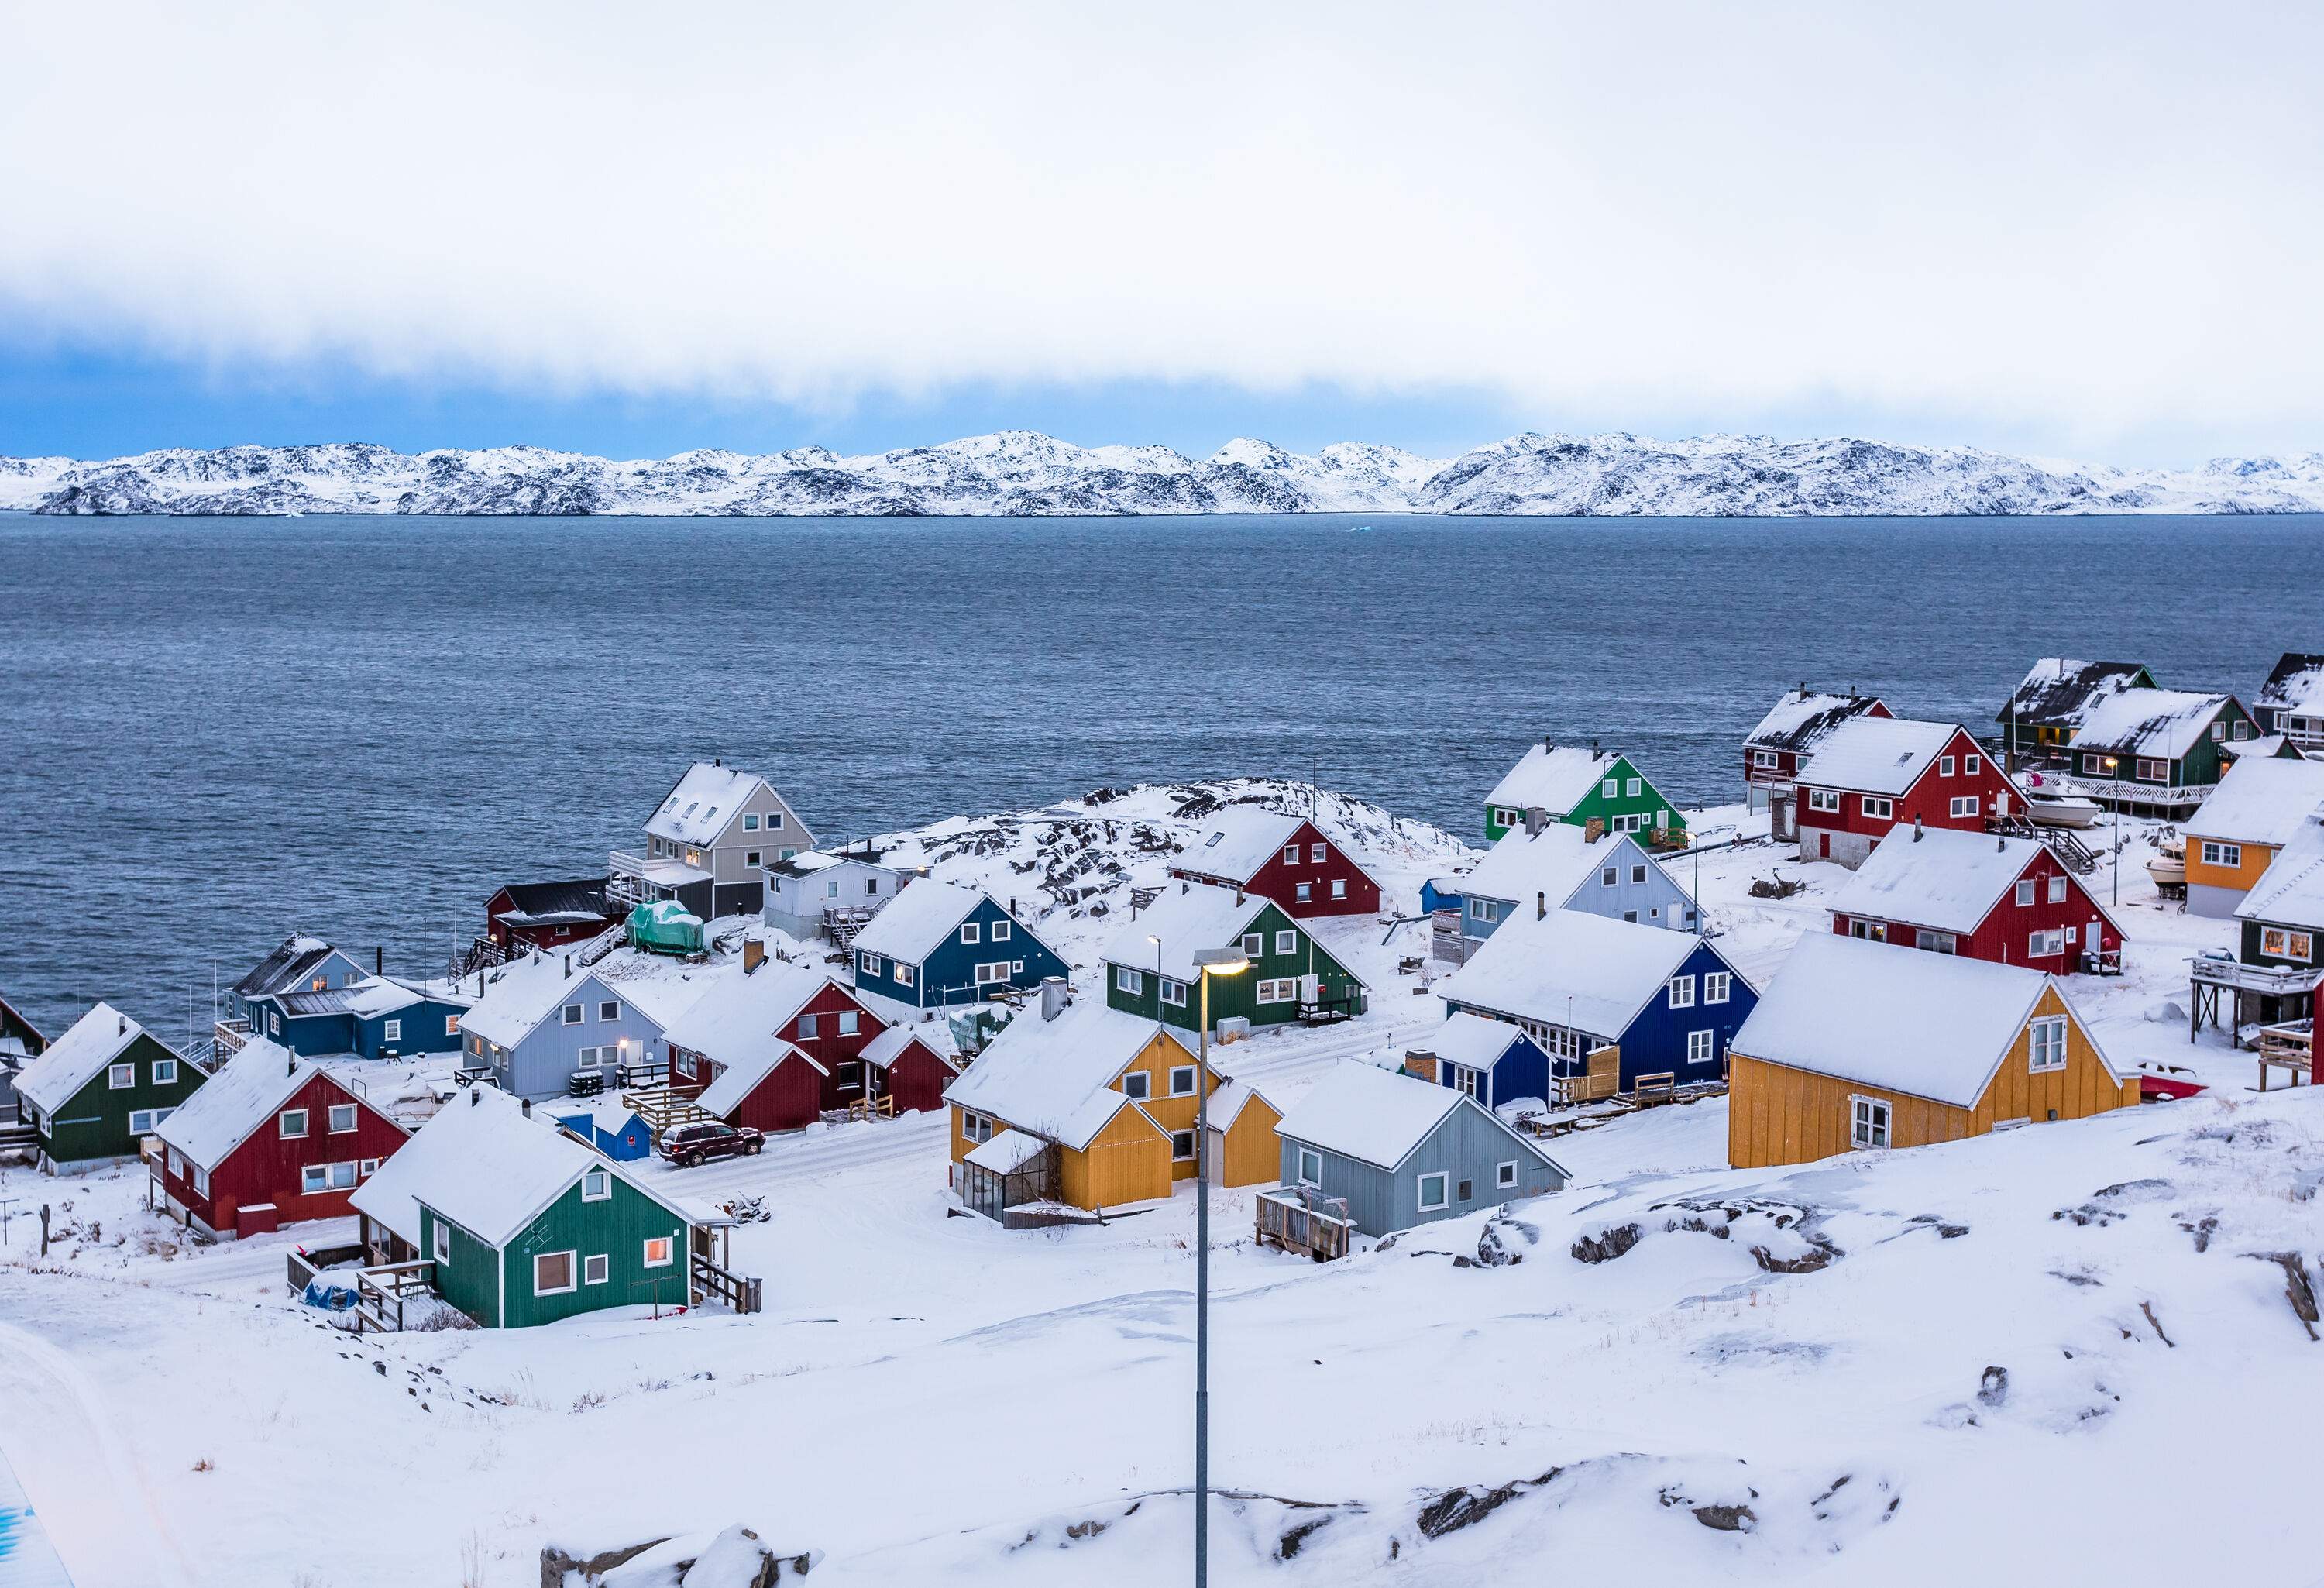 Colourful Inuit houses nestled among rocky terrain and snow-covered surroundings, situated by a fjord in a suburban area.